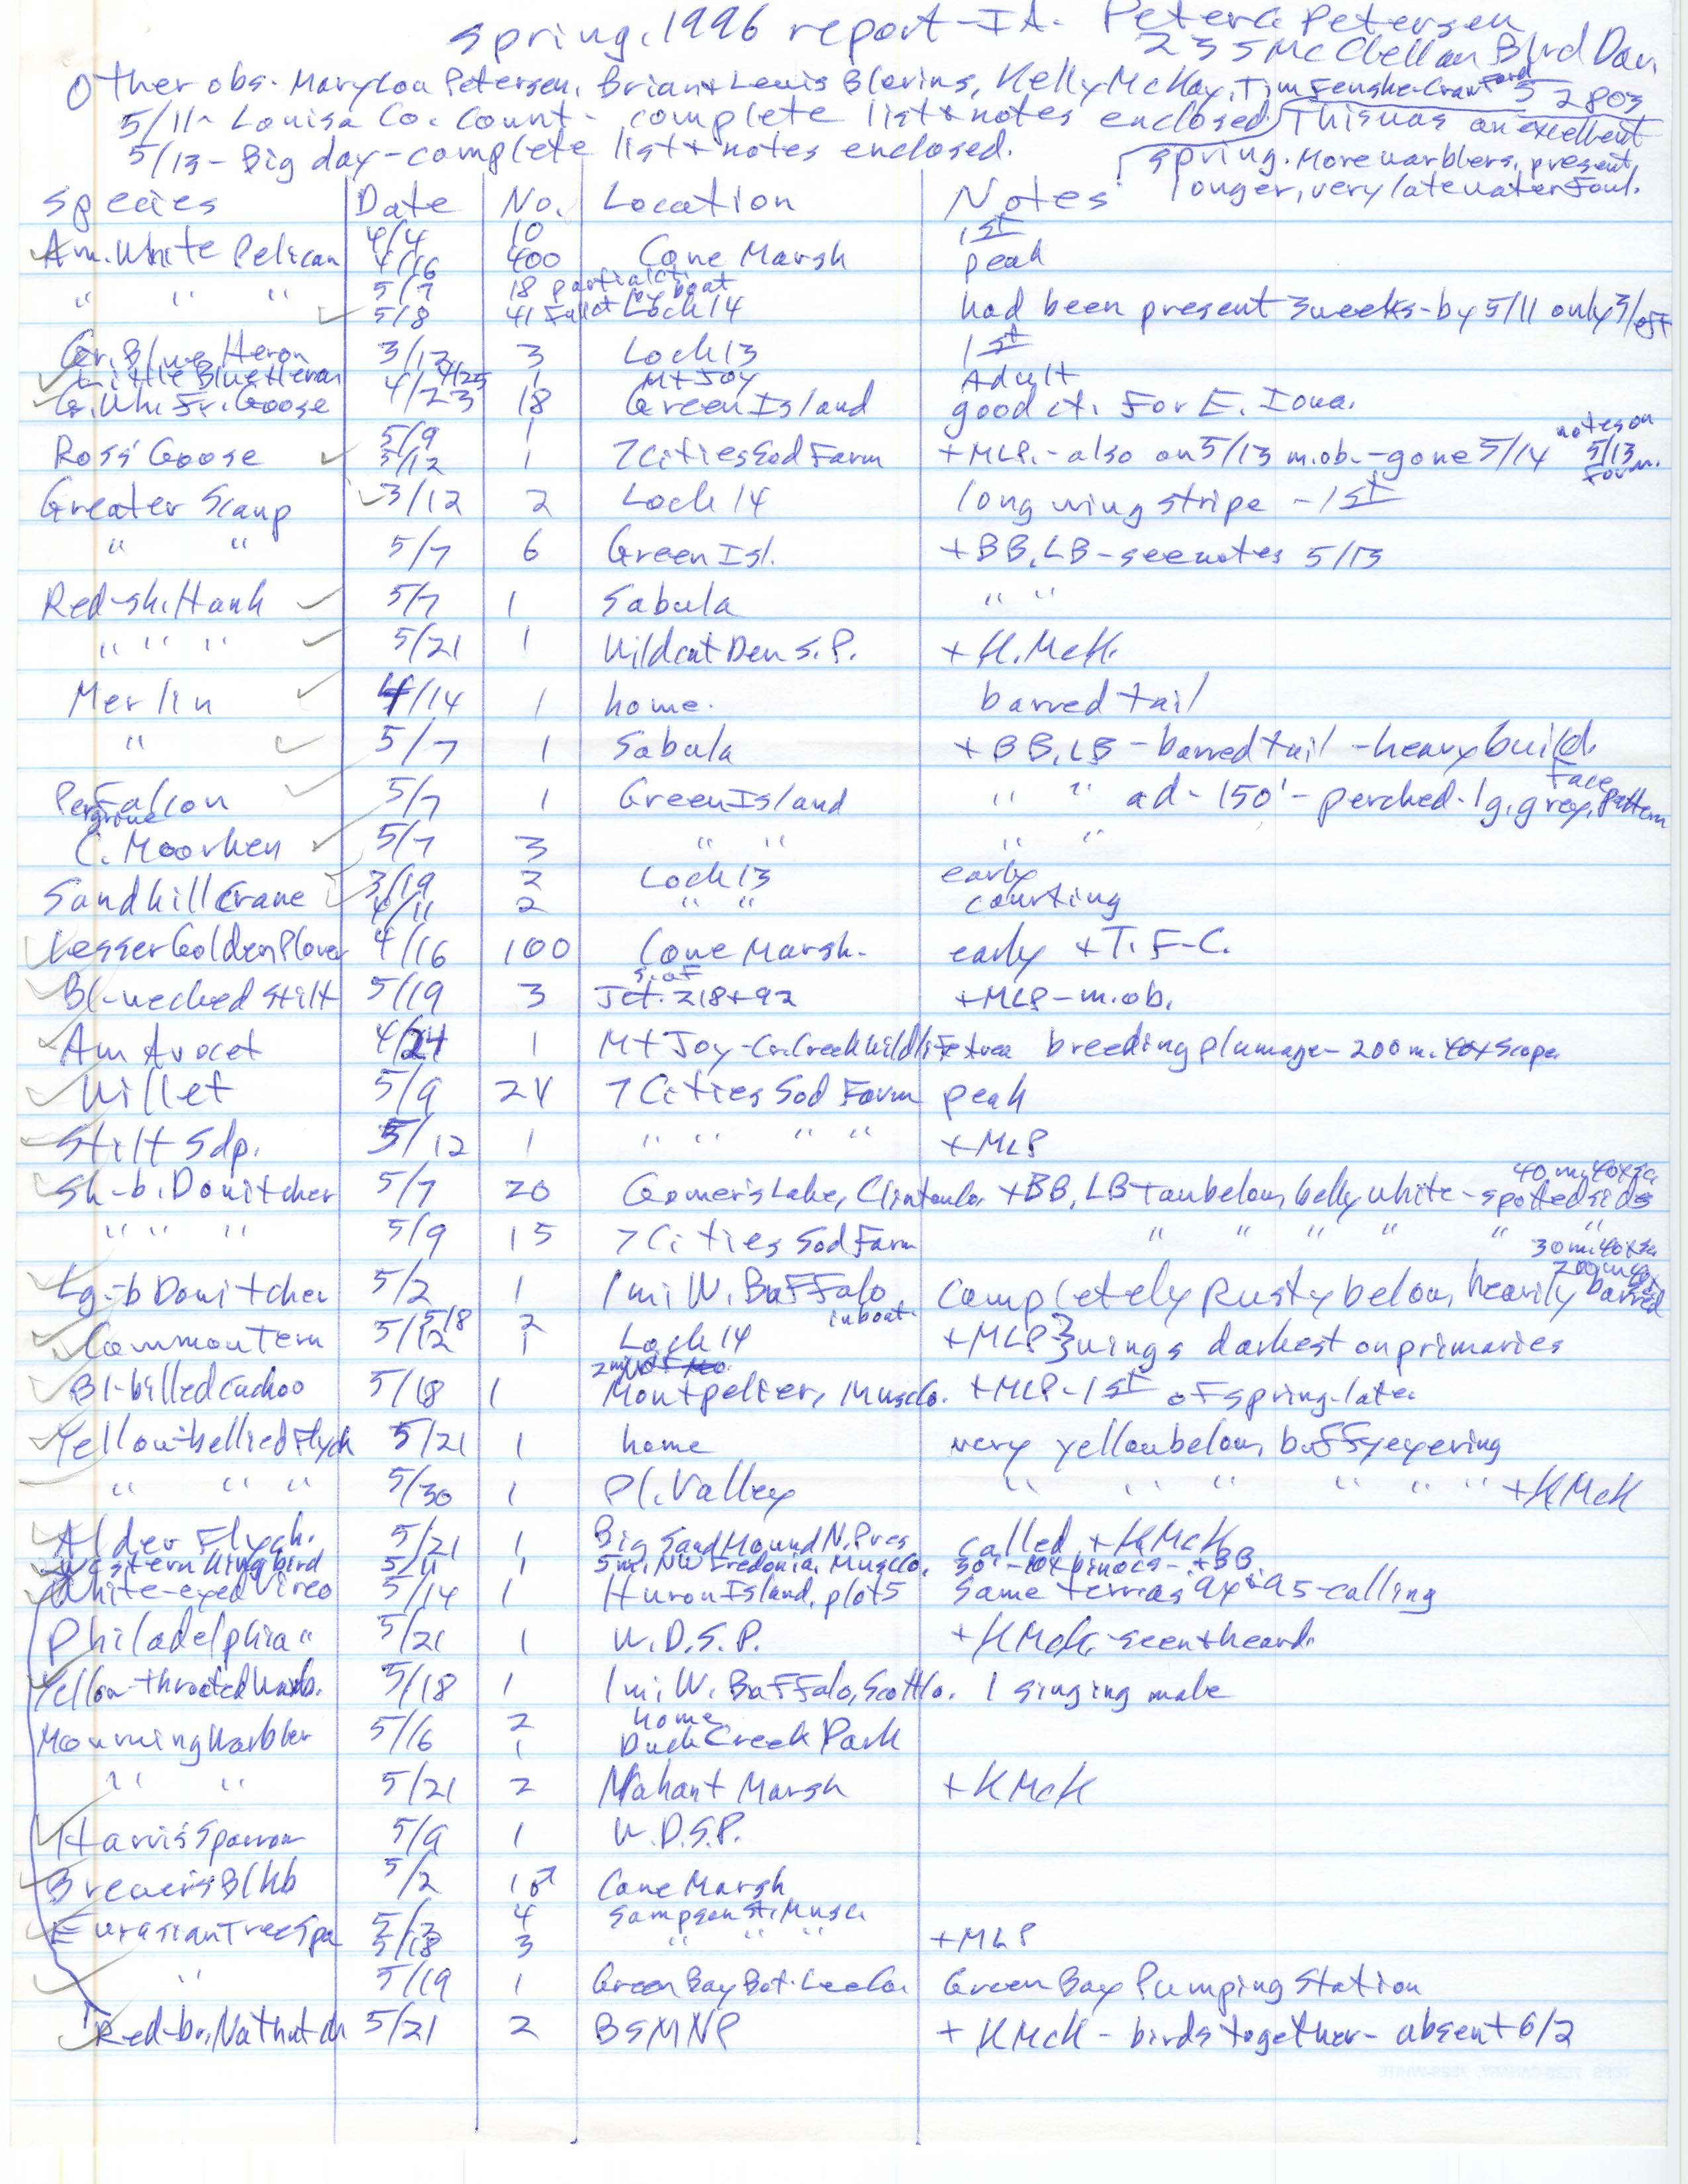 Field notes contributed by Peter C. Petersen, spring 1996